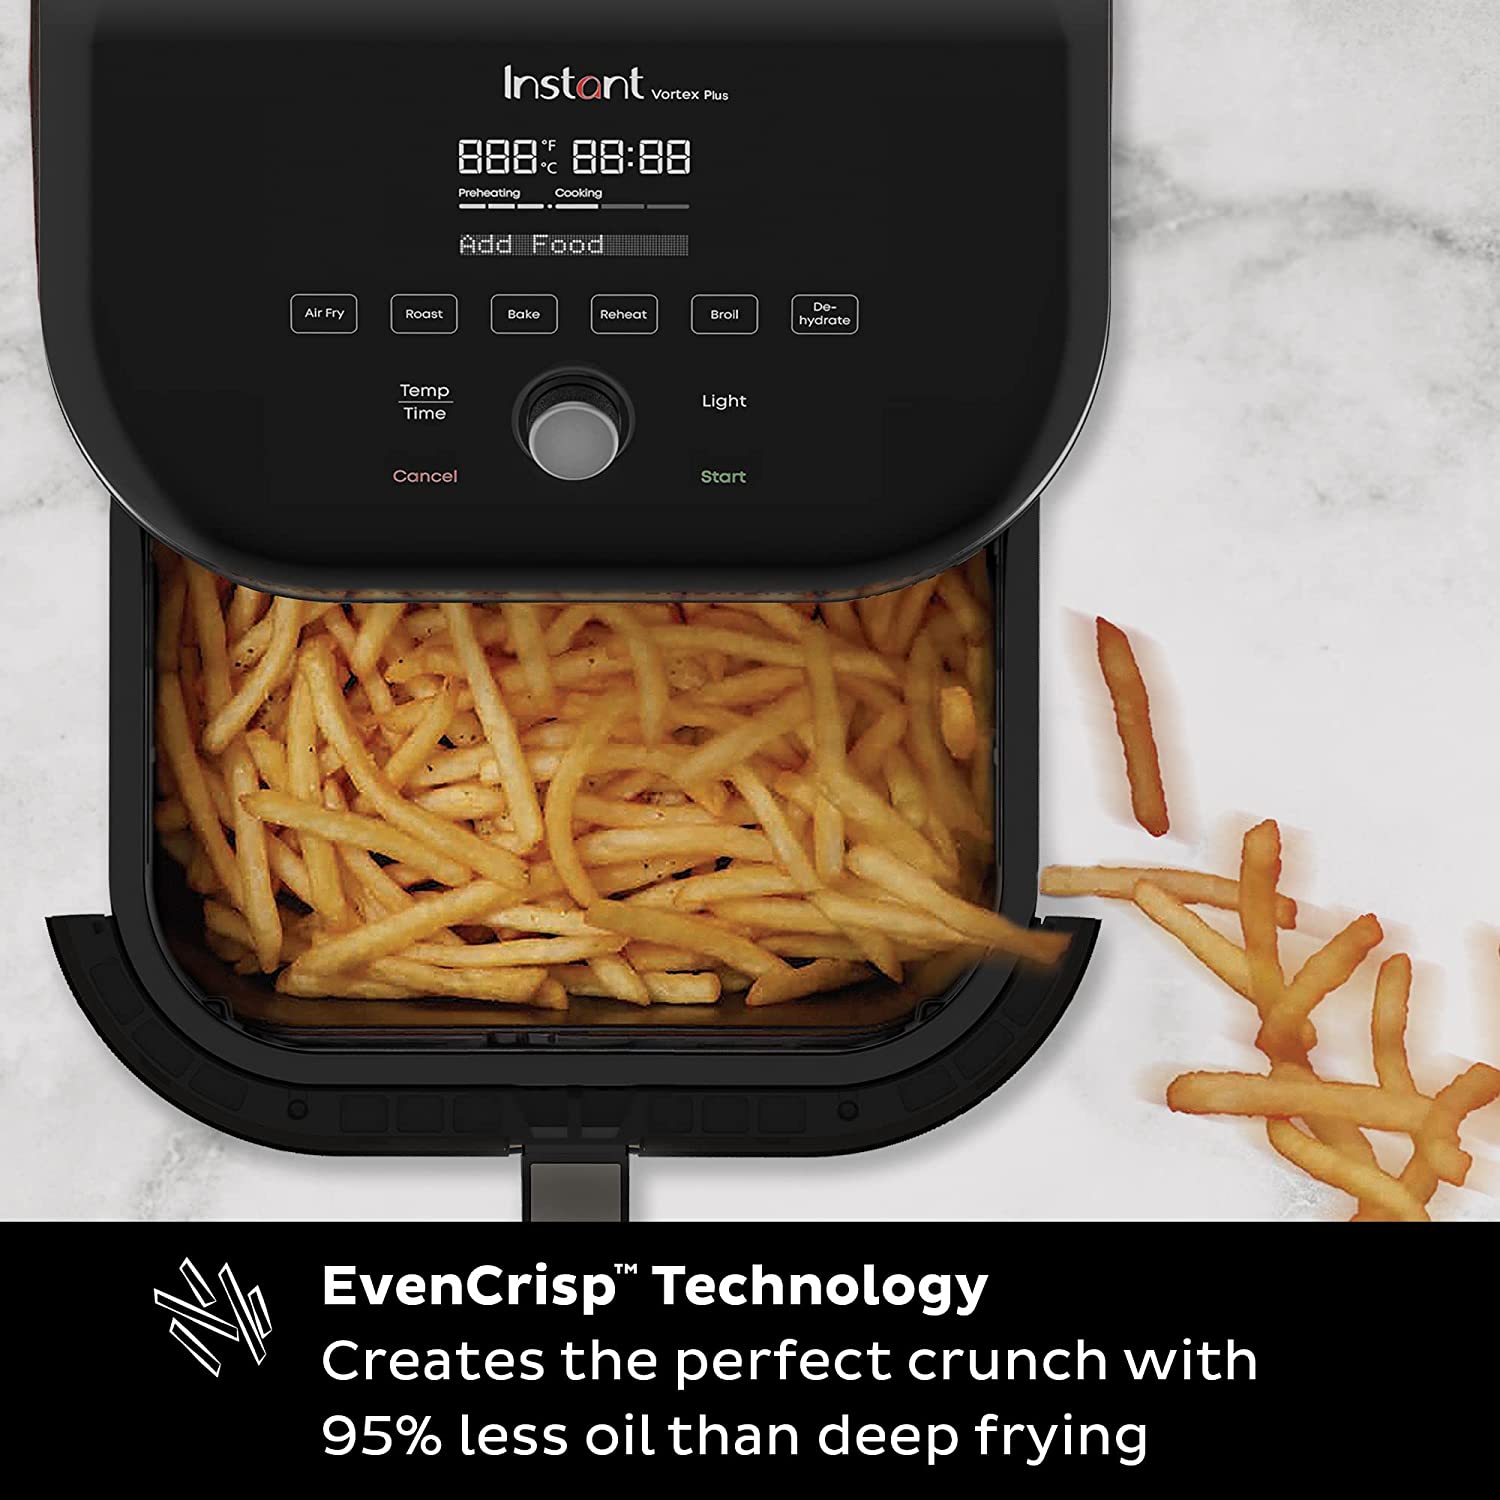 https://discounttoday.net/wp-content/uploads/2023/01/Instant-Vortex-Plus-6-Quart-Air-Fryer-Oven-From-the-Makers-of-Instant-Pot-with-Odor-Erase-Technology-ClearCook-Cooking-Window-App-with-over-100-Recipes-Single-Basket-Stainless-Steel5.jpg